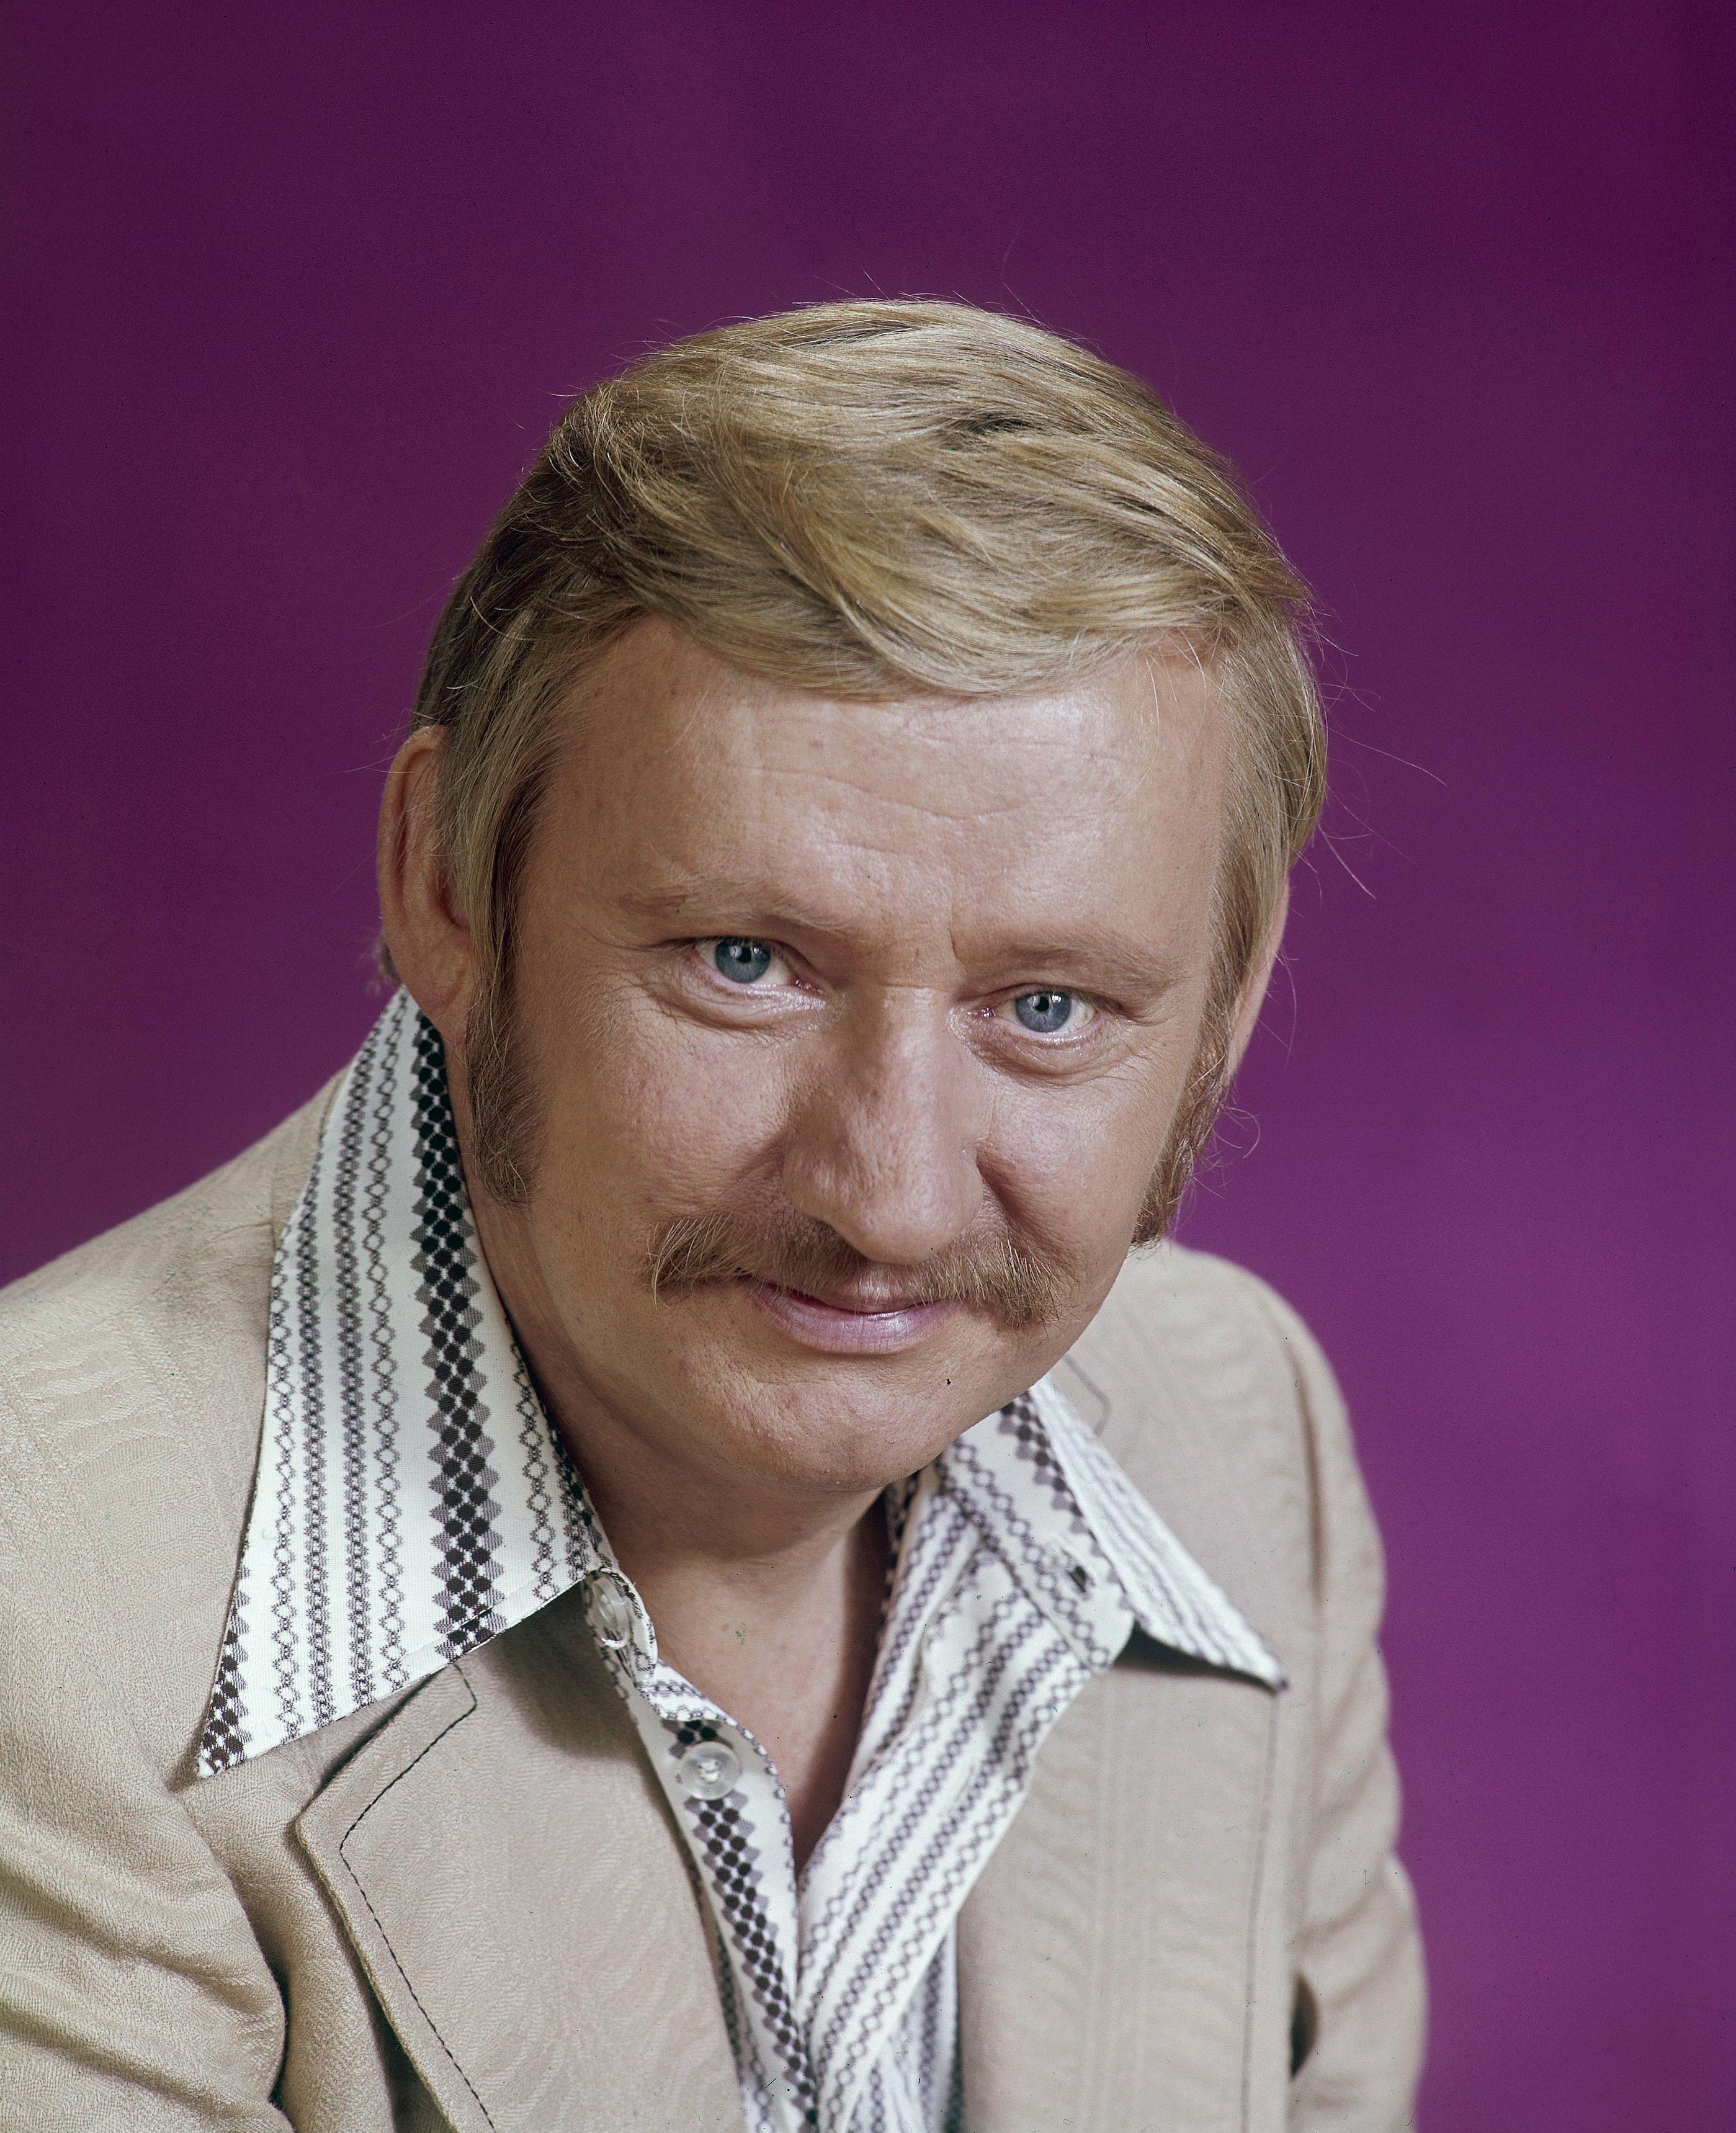 Dave Madden aka Reuben Kincaid from "The Partridge Family" | Source: Getty Images